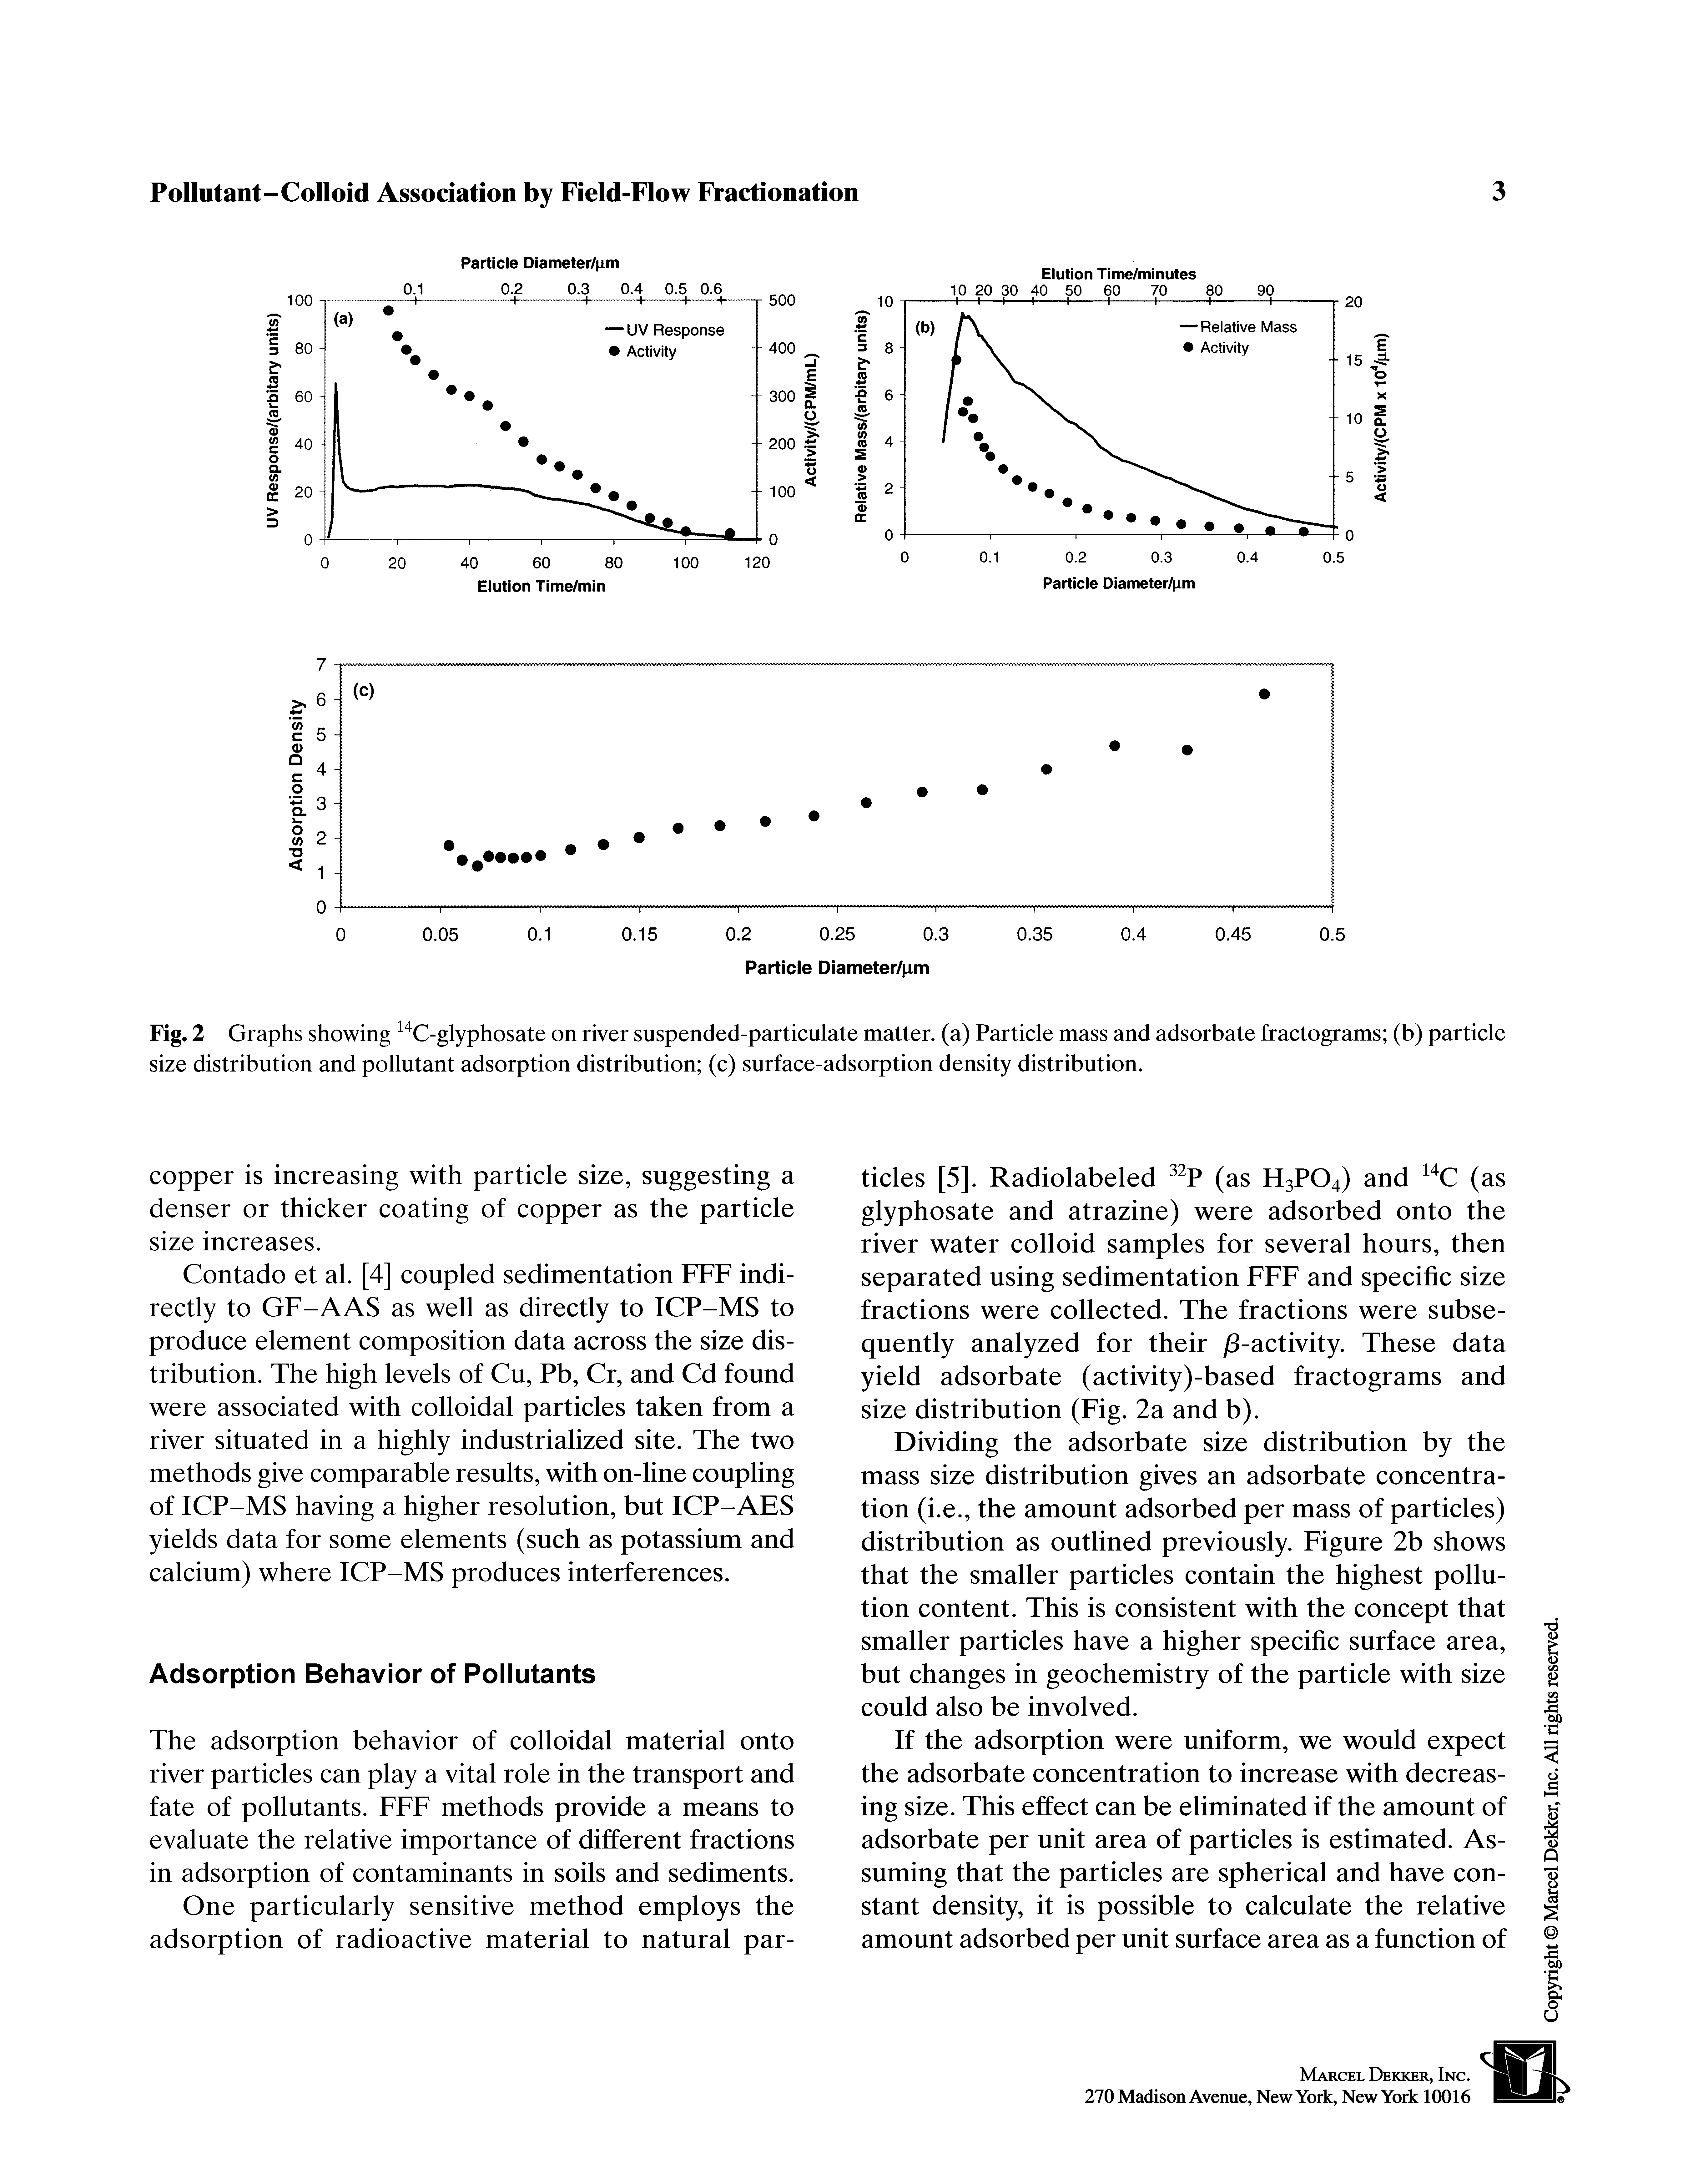 Fig. 2 Graphs showing " C-glyphosate on river suspended-particulate matter, (a) Particle mass and adsorbate fractograms (b) particle size distribution and pollutant adsorption distribution (c) surface-adsorption density distribution.